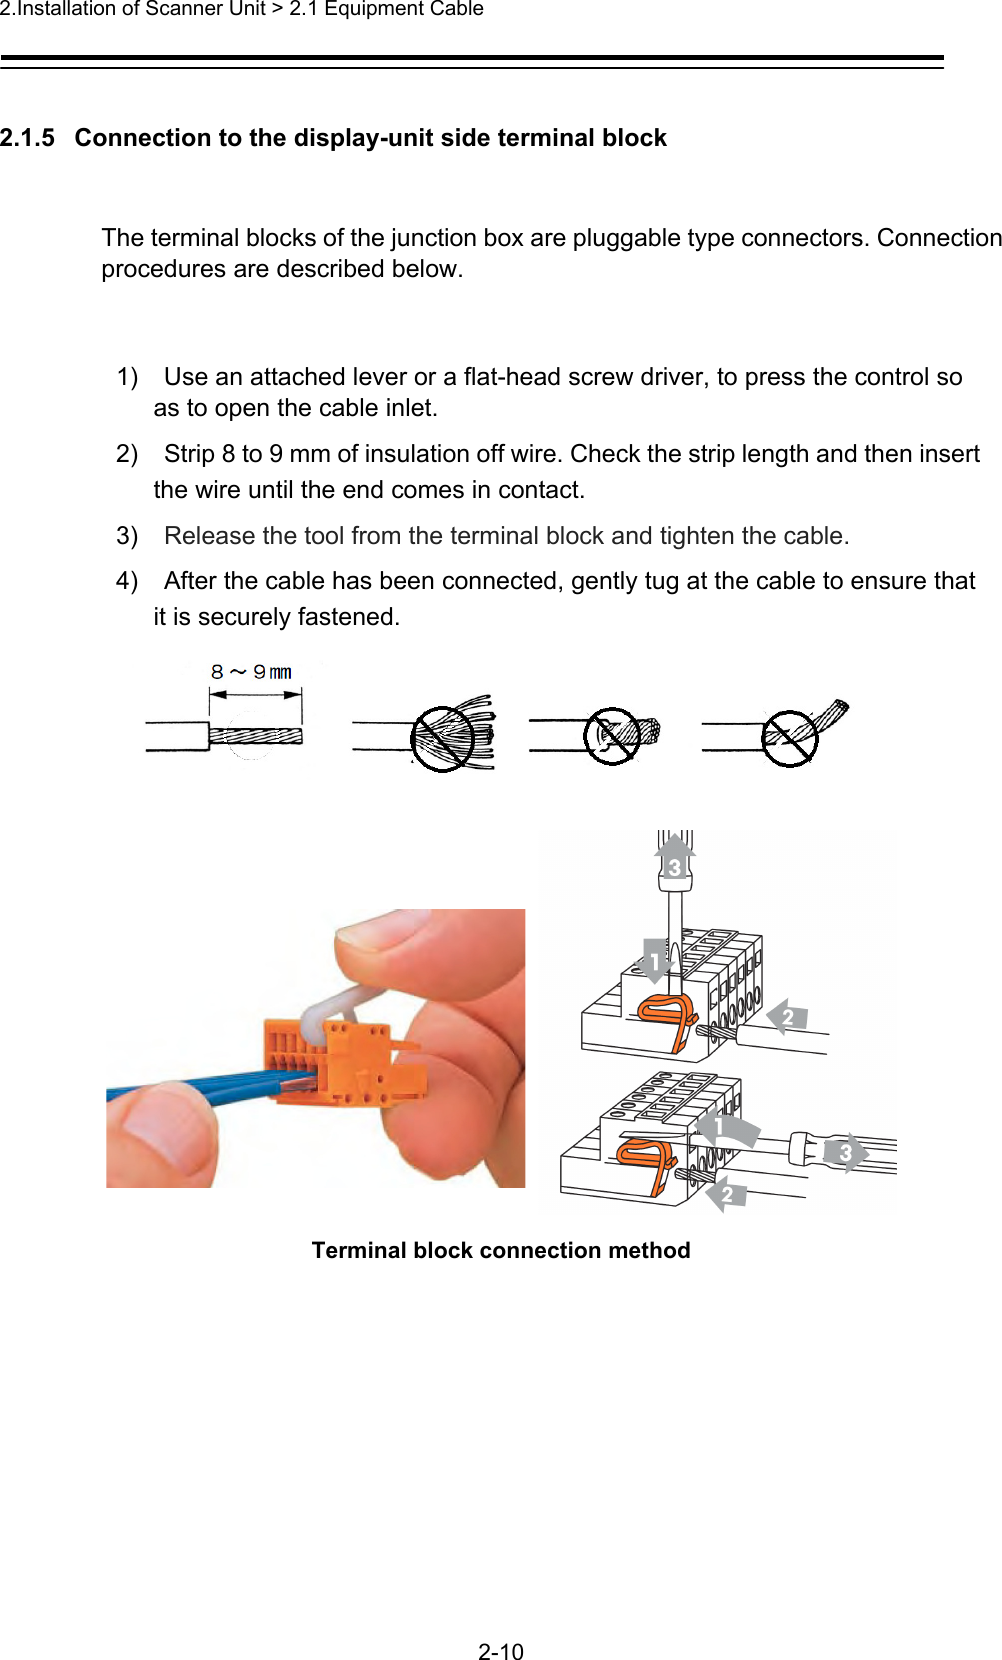 2.Installation of Scanner Unit &gt; 2.1 Equipment Cable   2-10  2.1.5   Connection to the display-unit side terminal block  The terminal blocks of the junction box are pluggable type connectors. Connection procedures are described below.    1)  Use an attached lever or a flat-head screw driver, to press the control so as to open the cable inlet.   2)  Strip 8 to 9 mm of insulation off wire. Check the strip length and then insert the wire until the end comes in contact.   3)  Release the tool from the terminal block and tighten the cable. 4)  After the cable has been connected, gently tug at the cable to ensure that it is securely fastened.  Terminal block connection method